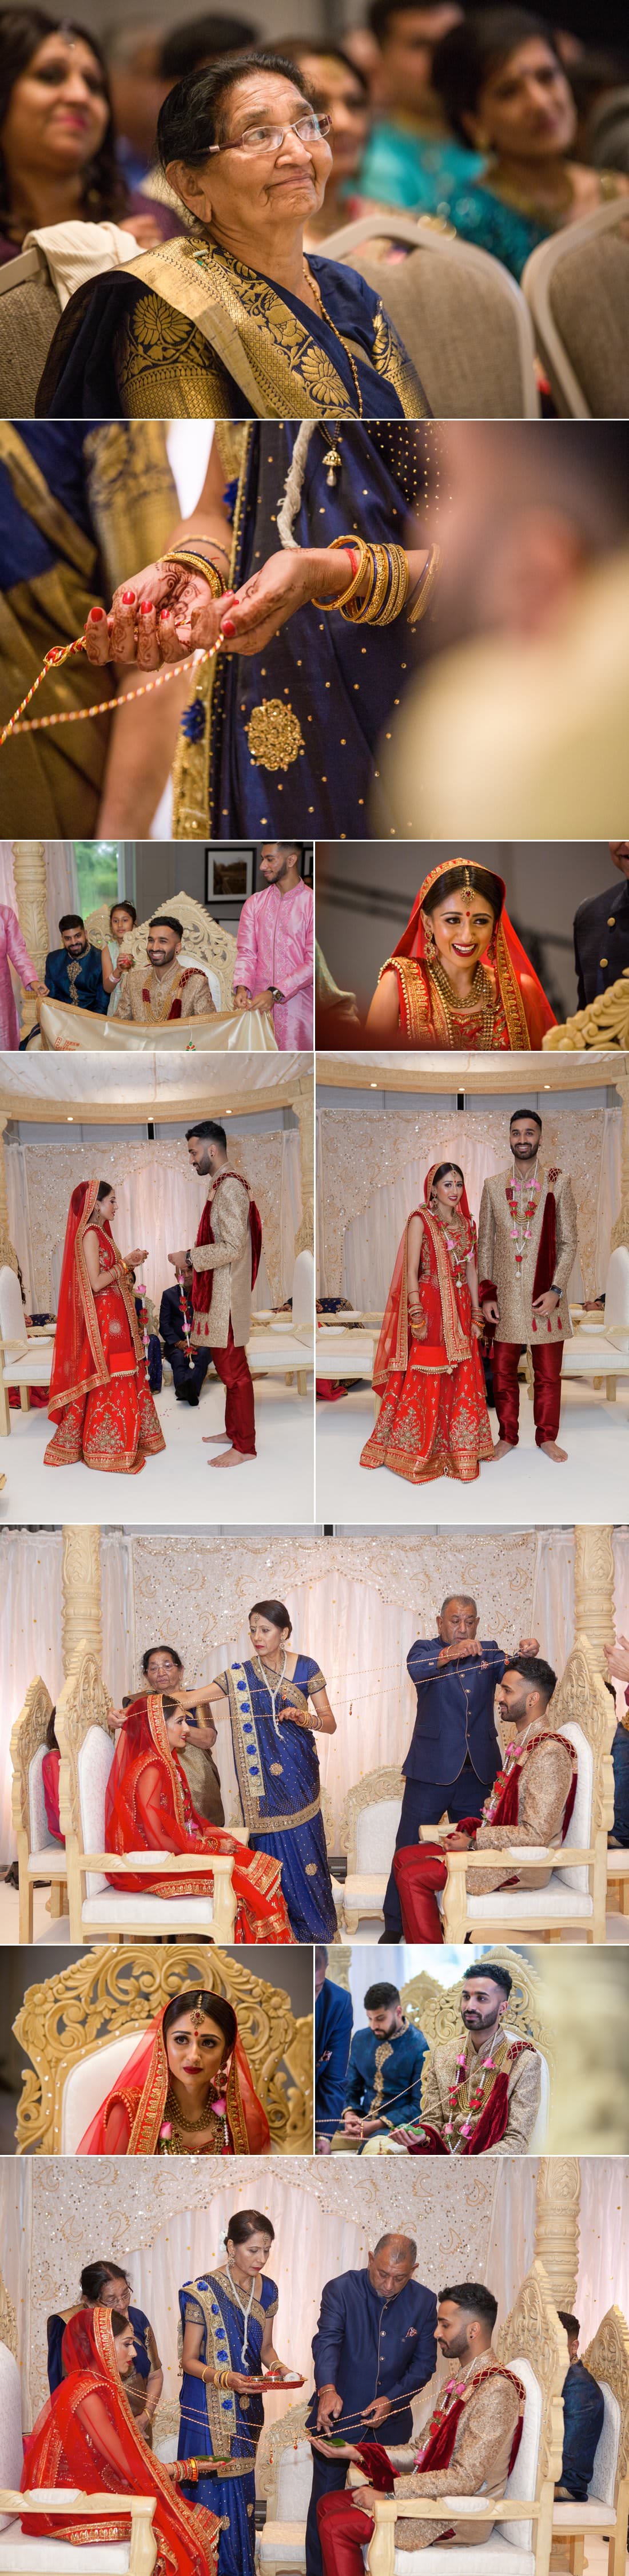 Indian wedding photography at Belfry Hotel Hiren Mica 8